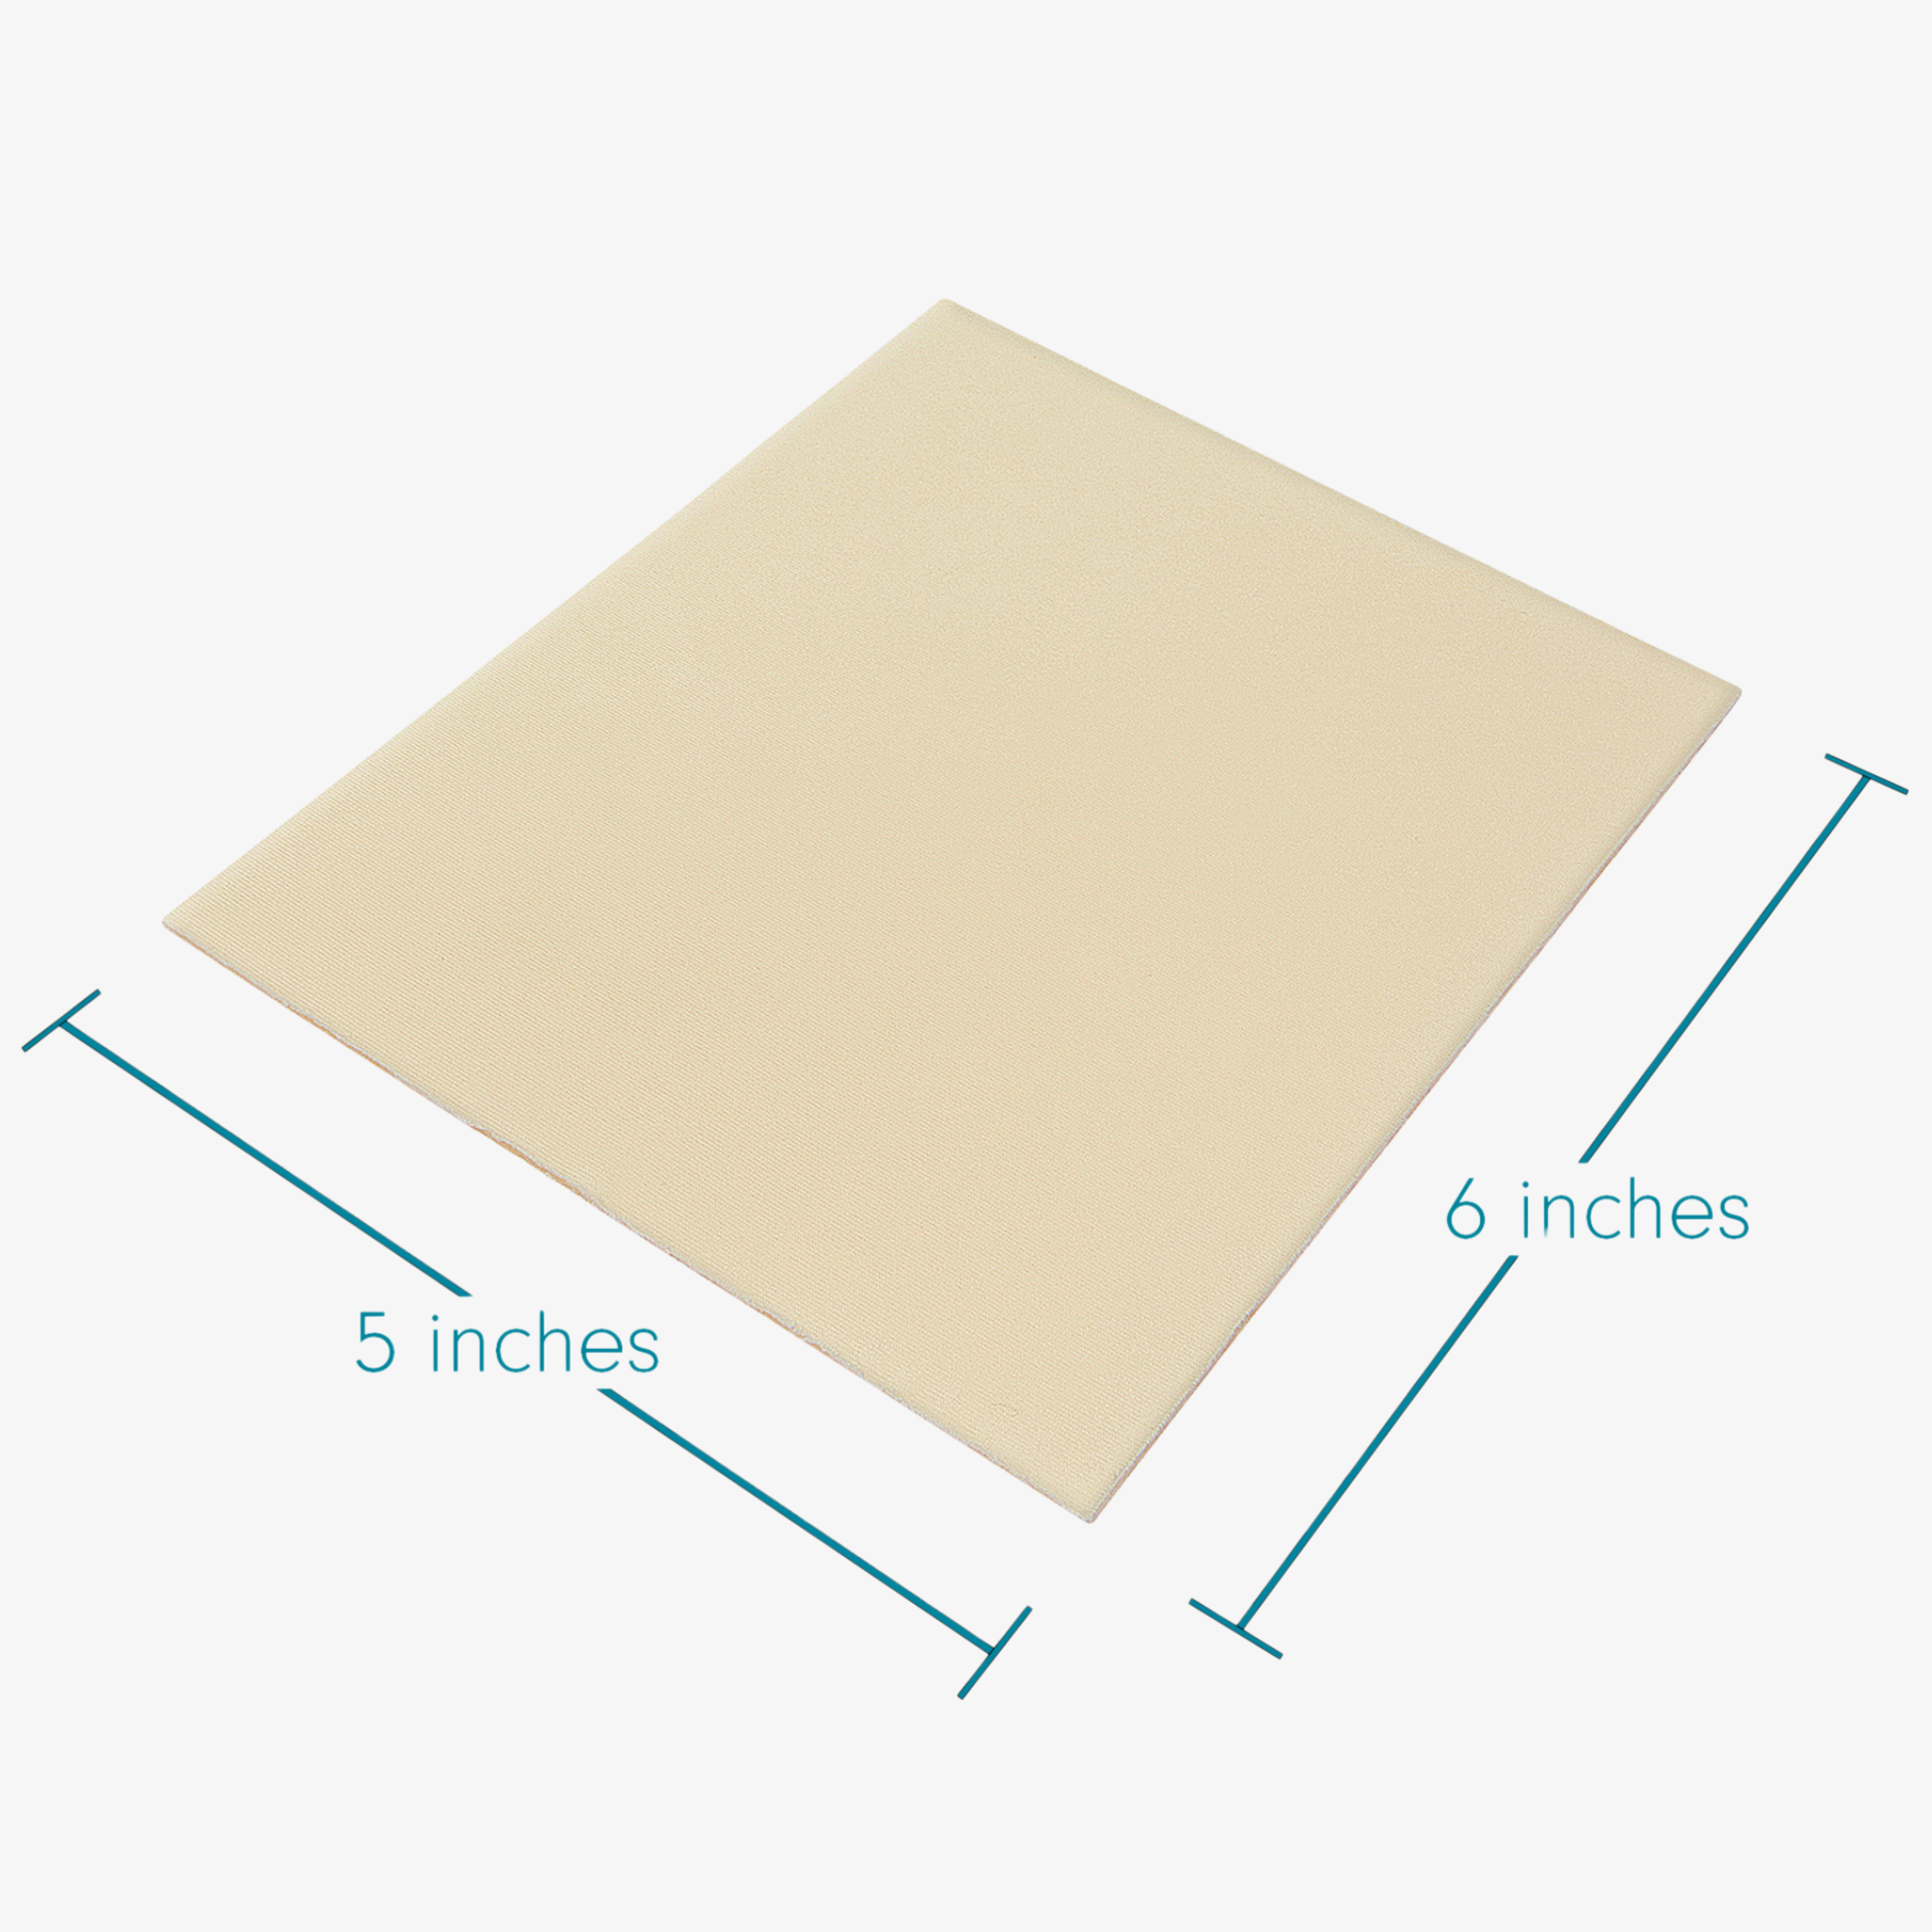 Advanced Medical-Grade Silicone Sheet 5" x 6" showing dimension of product | beige